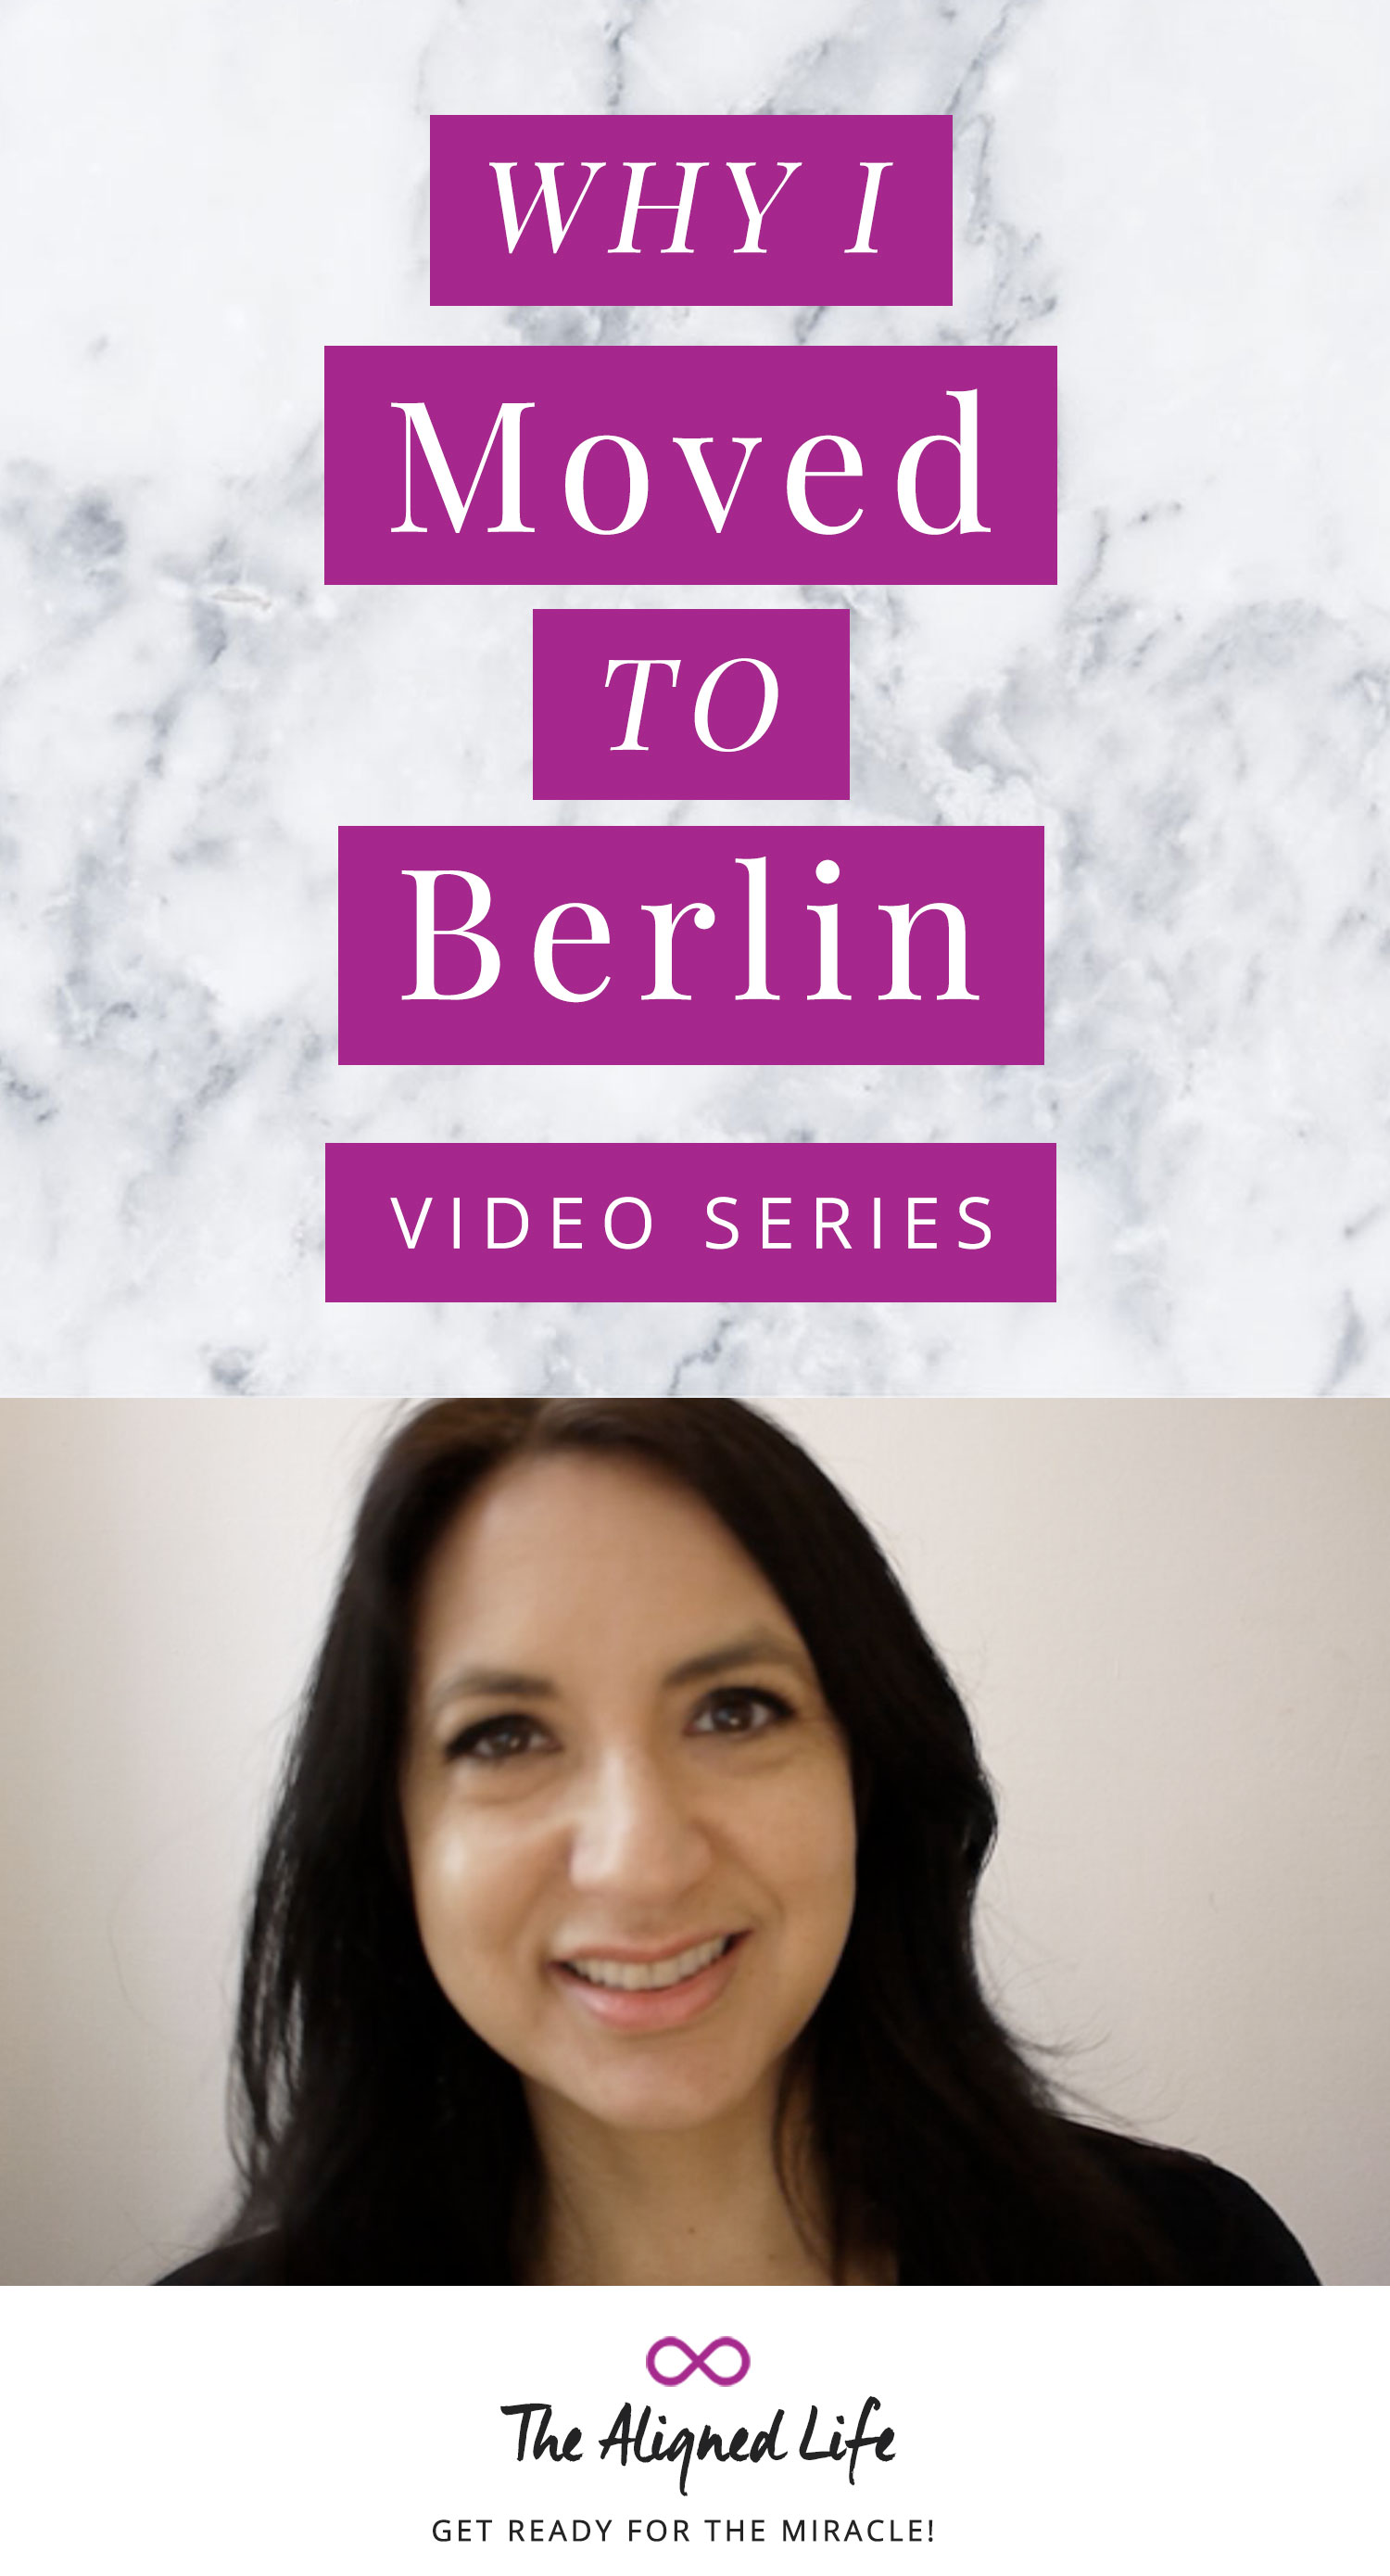 Video: Why I Moved To Berlin